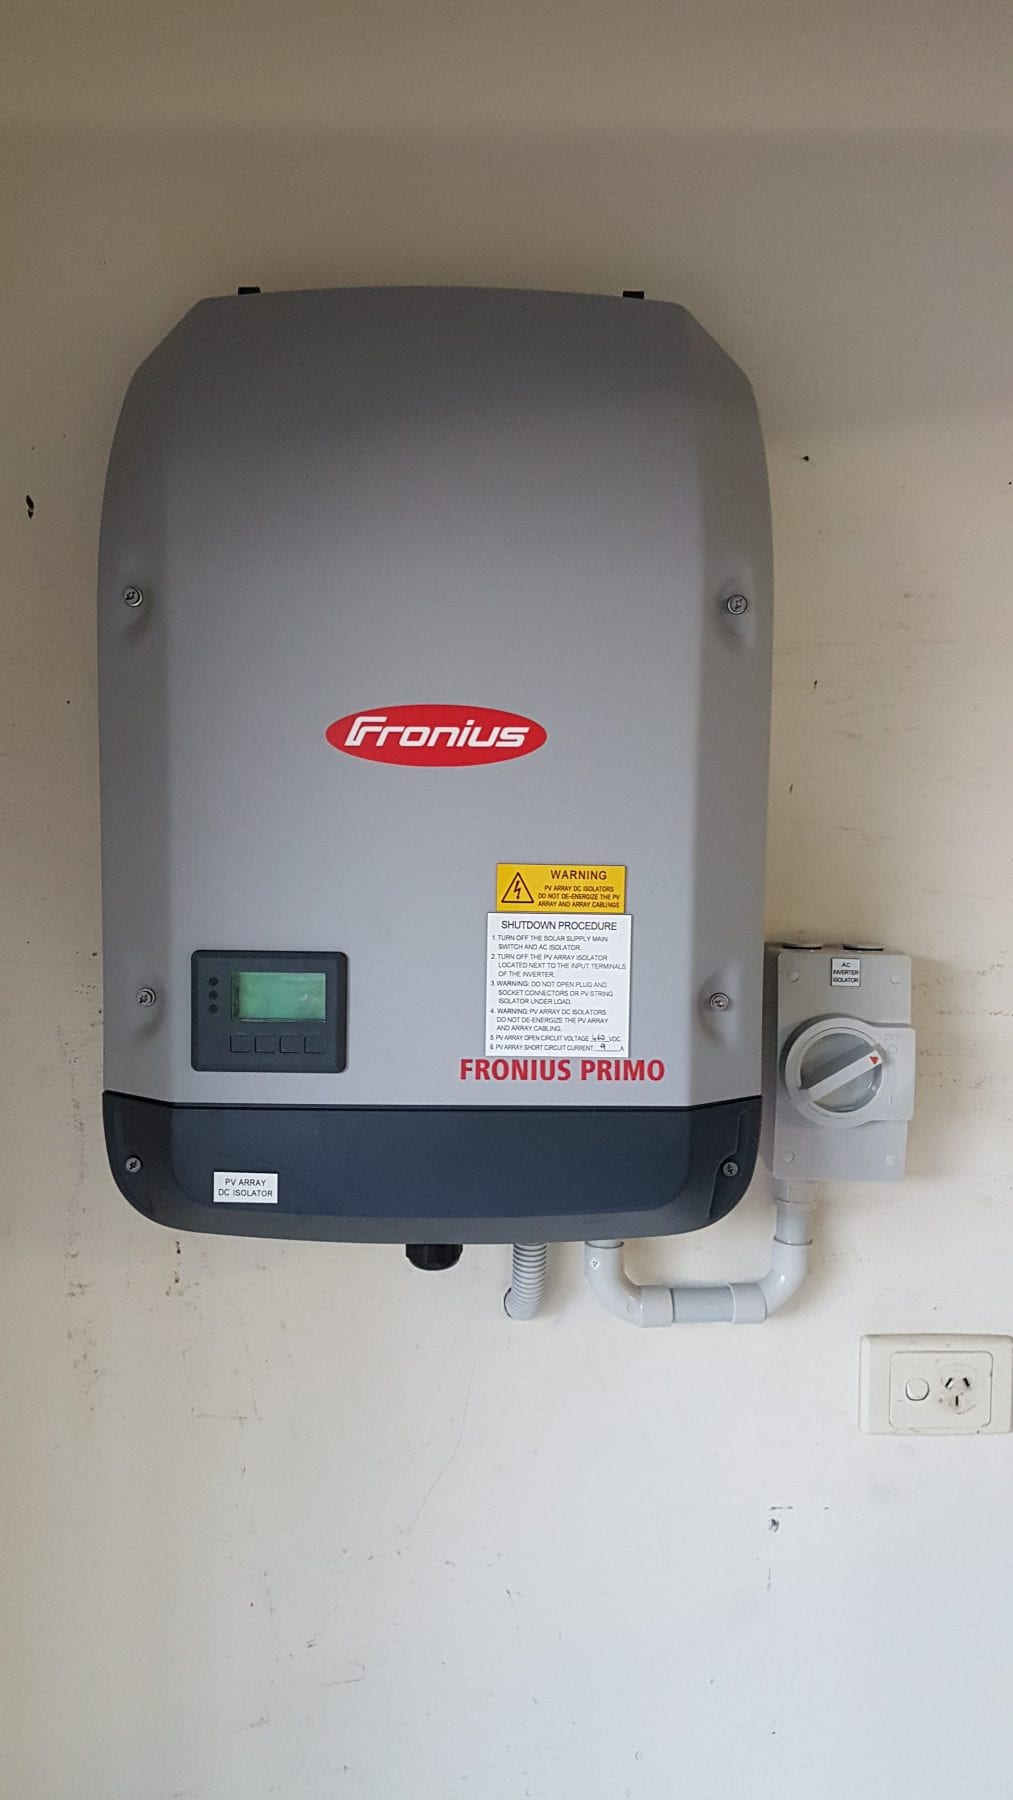 6.48kW Q-Cell & Fronius System